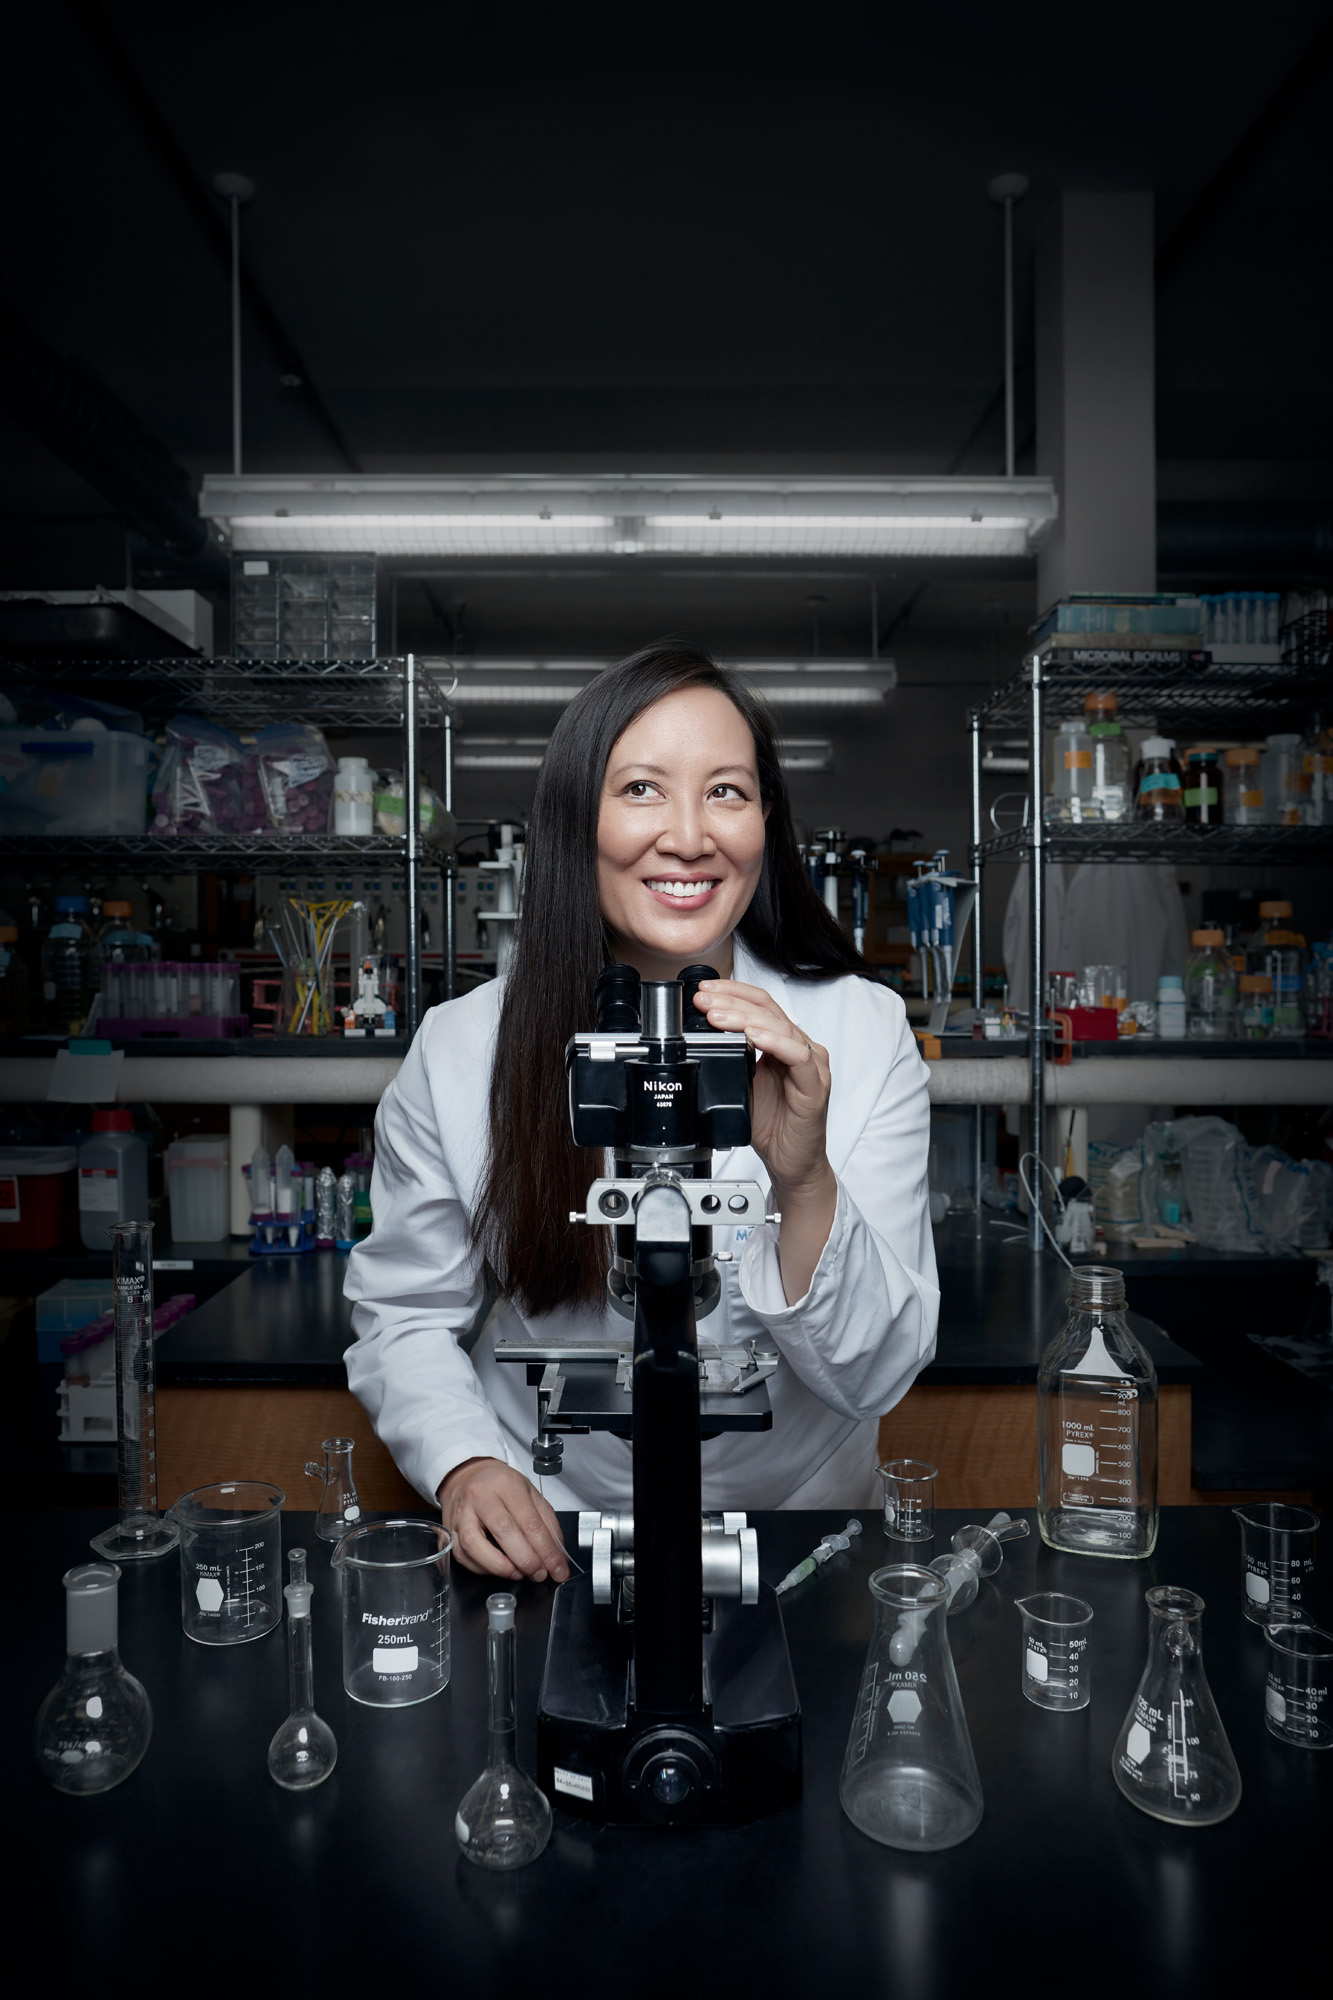 cc2018024 -Connie Chang,Professor, Chemical and Biological Engineering, Montana State University